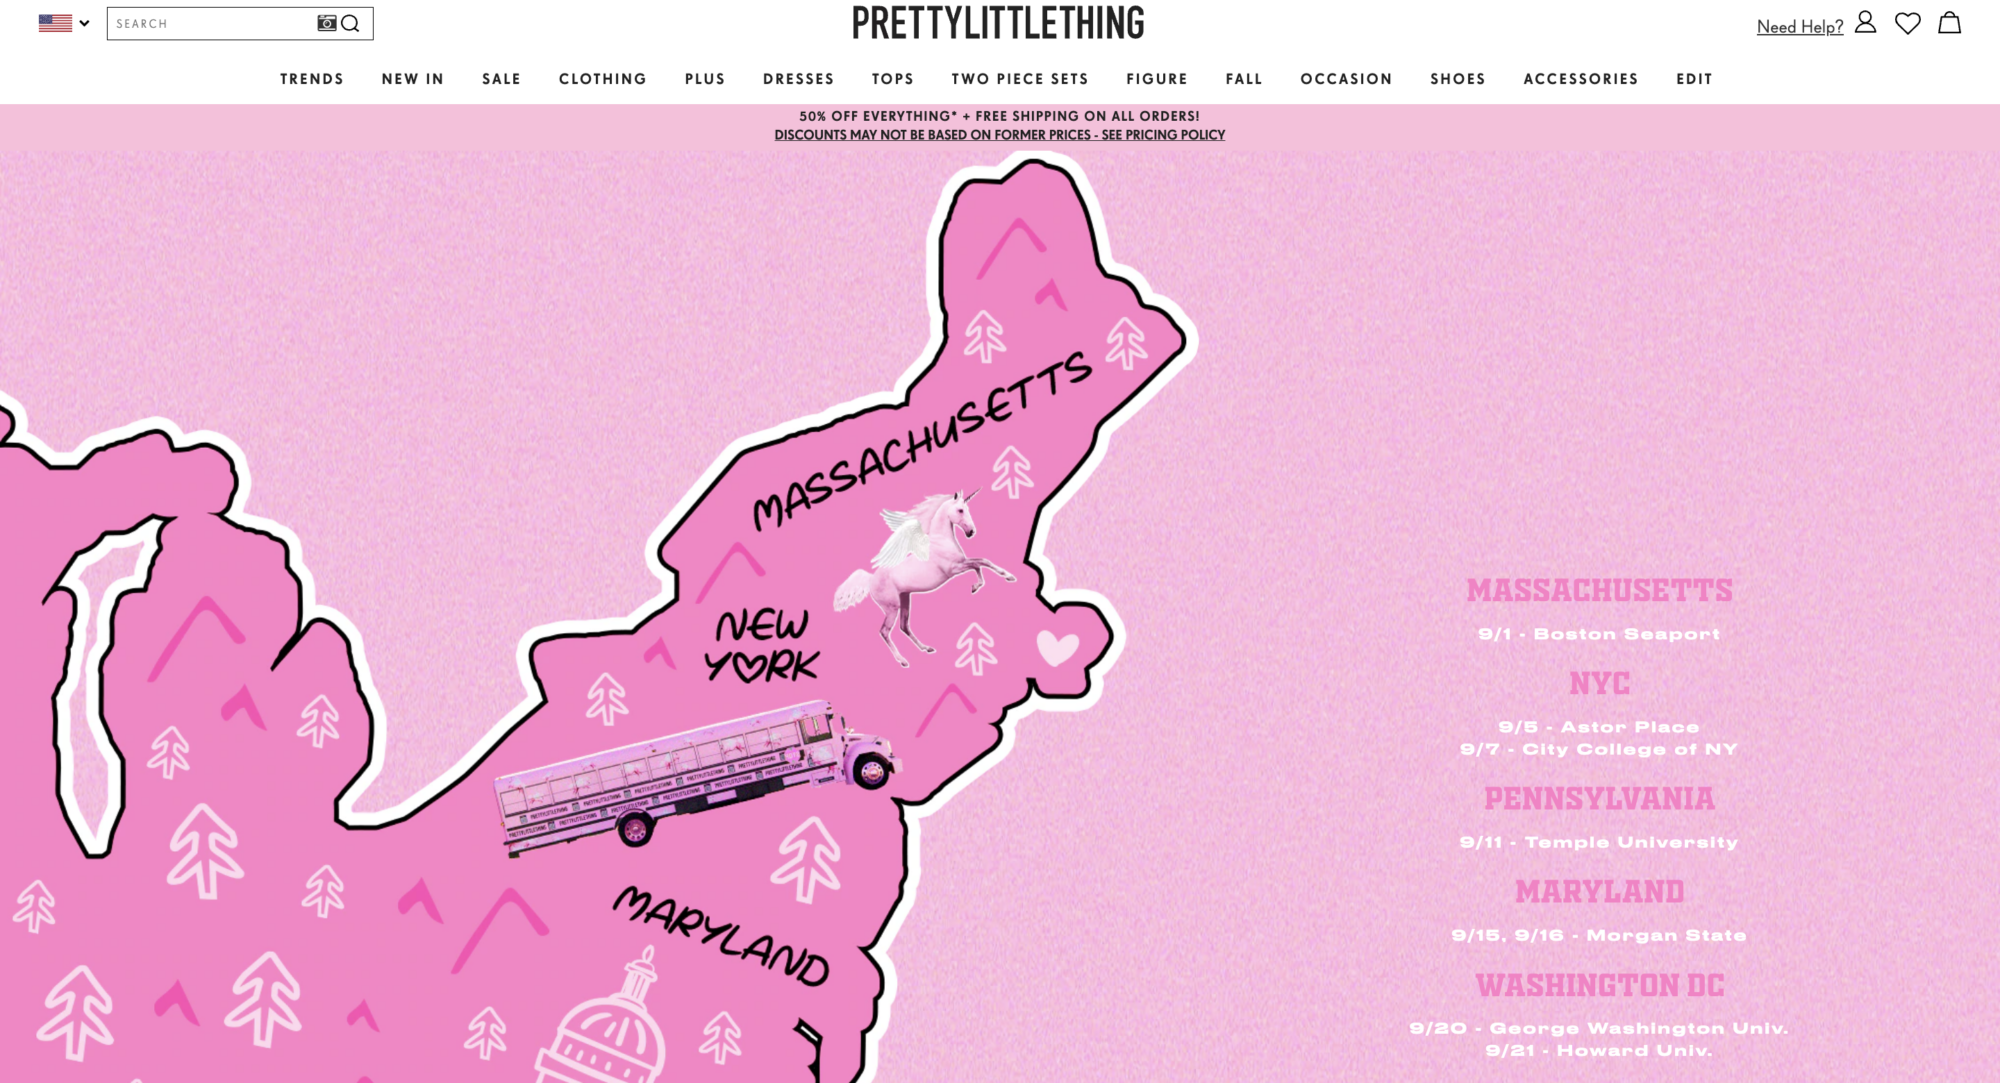 PrettyLittleThing uses a bus tour around college campuses to recruit people for its influencer program.